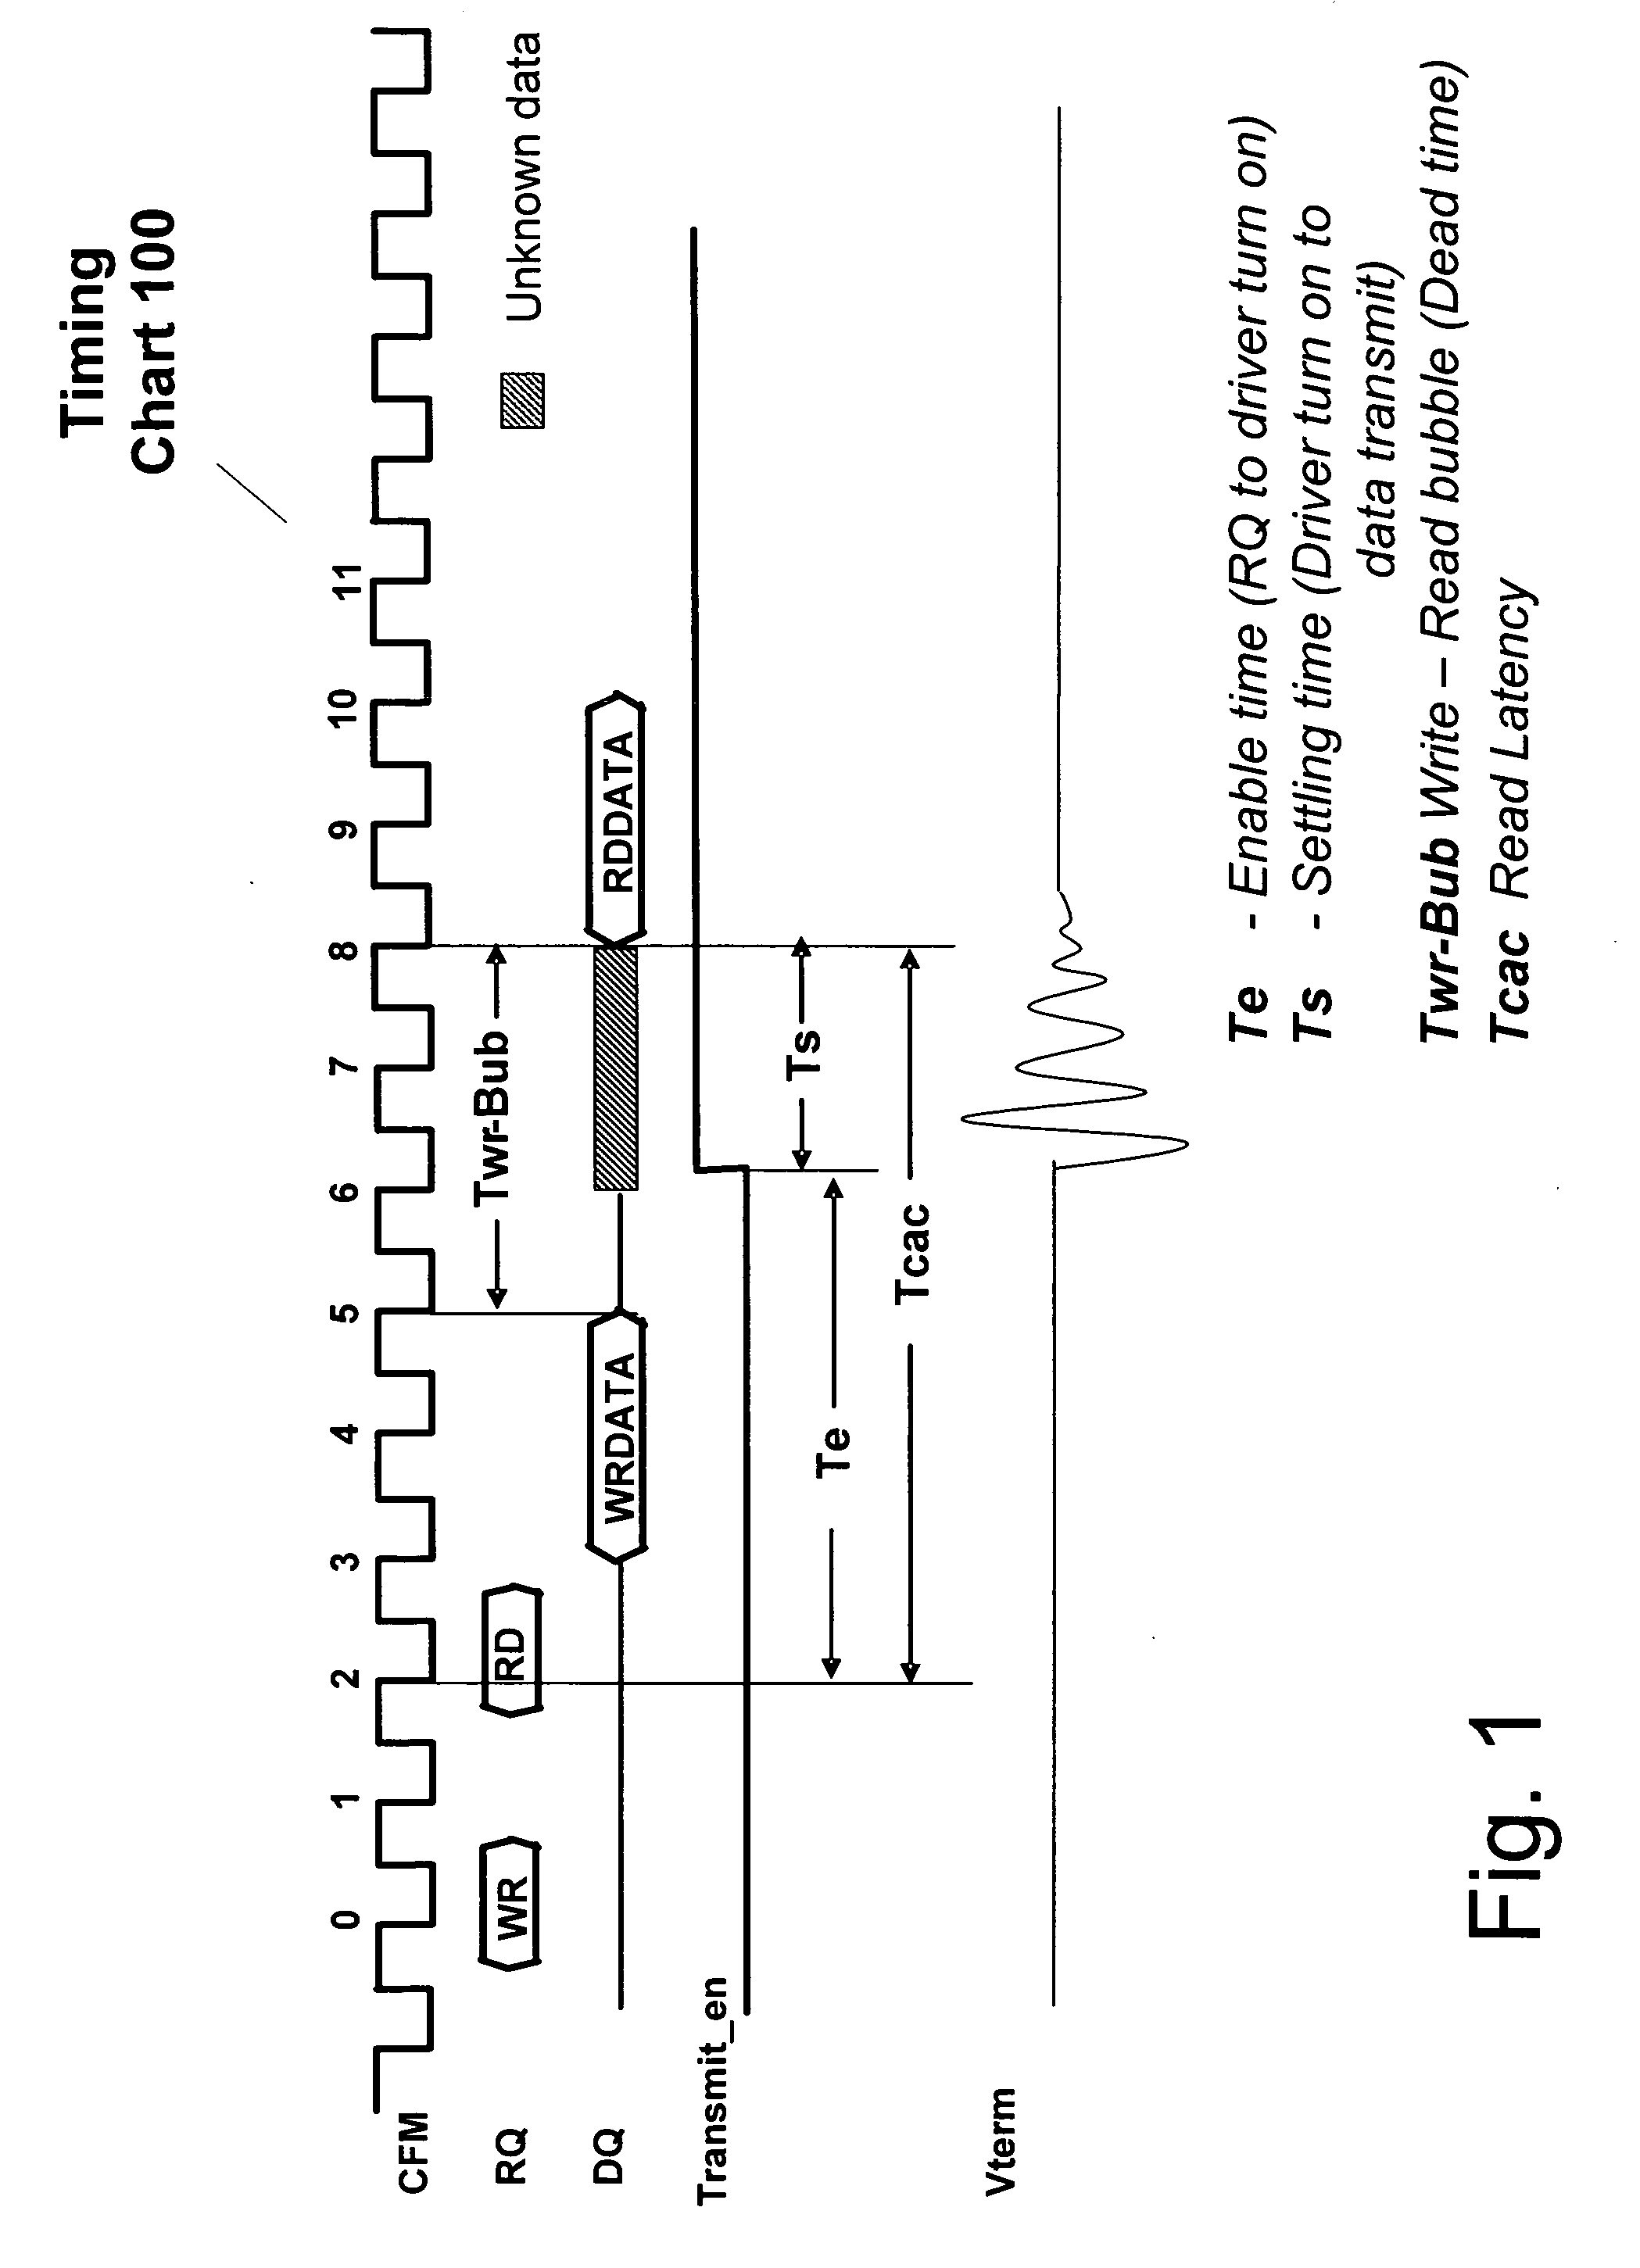 Programmable output driver turn-on time for an integrated circuit memory device